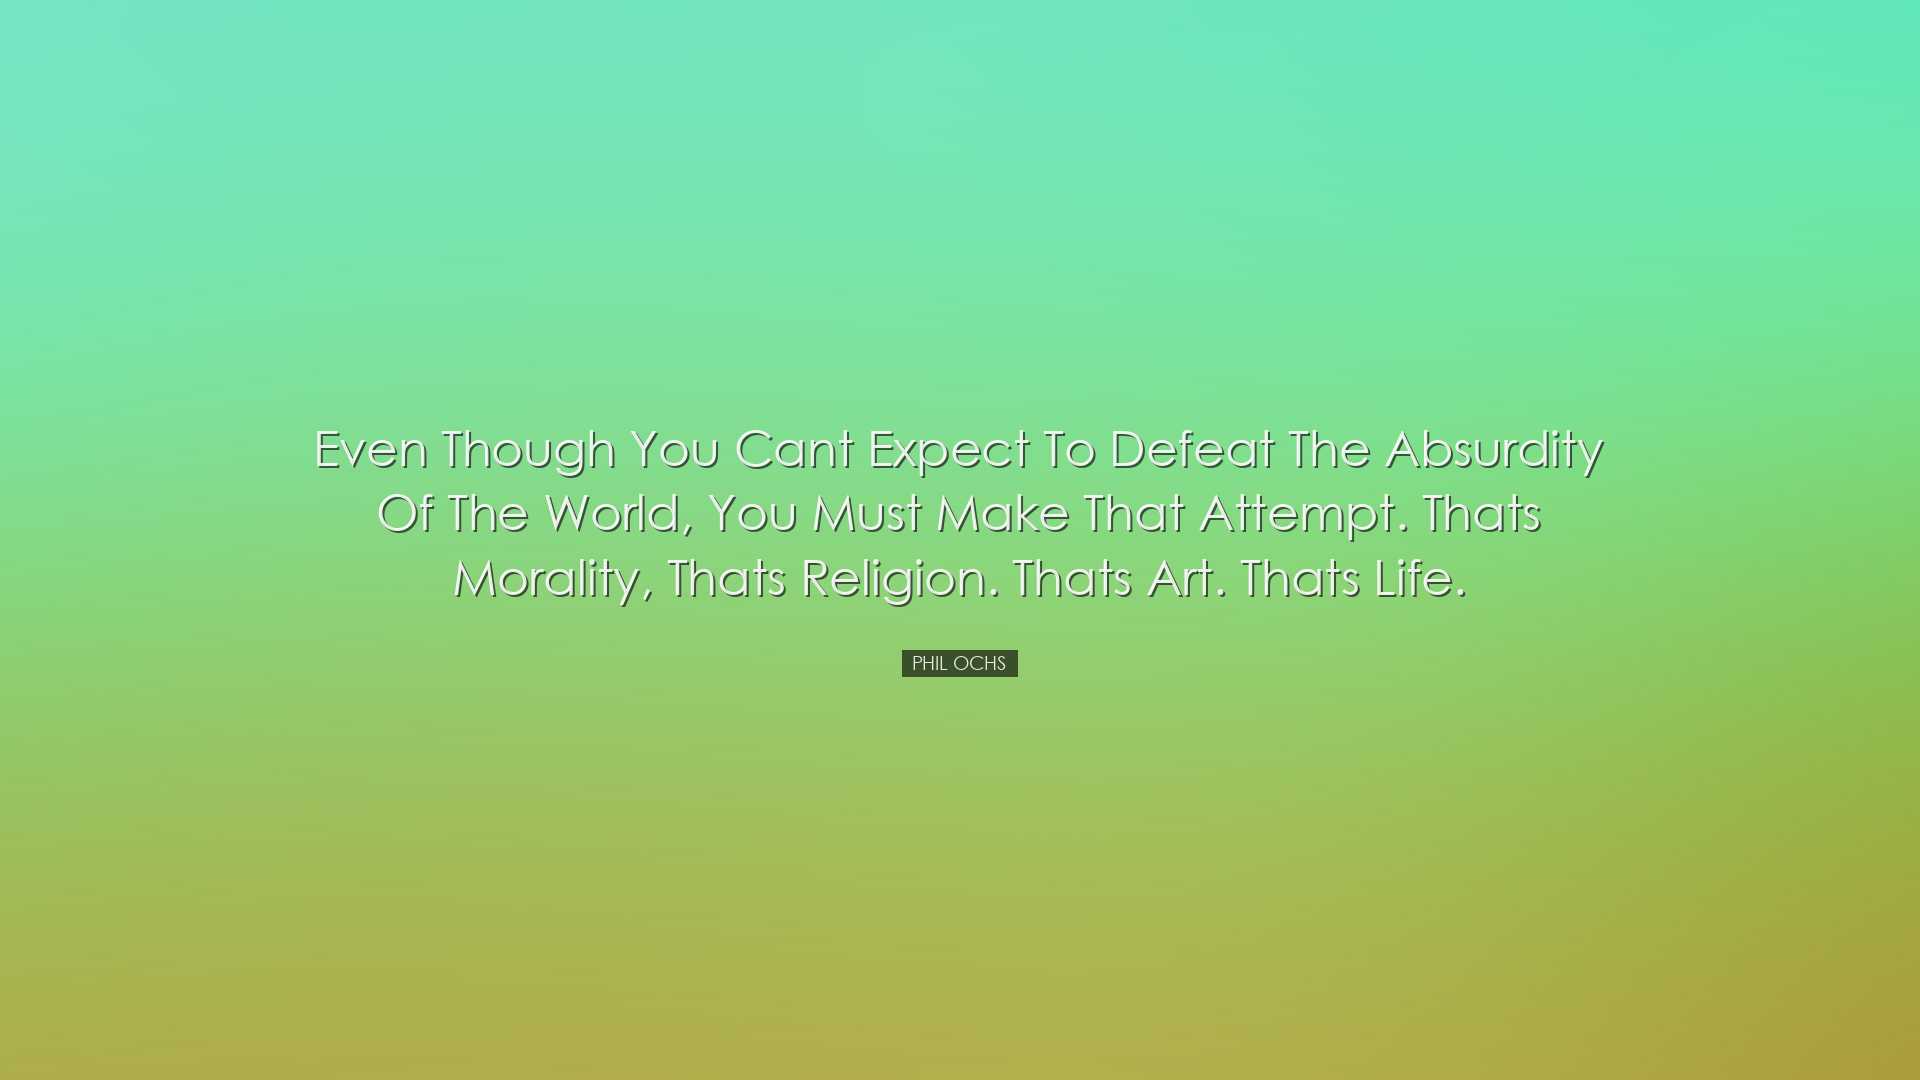 Even though you cant expect to defeat the absurdity of the world,